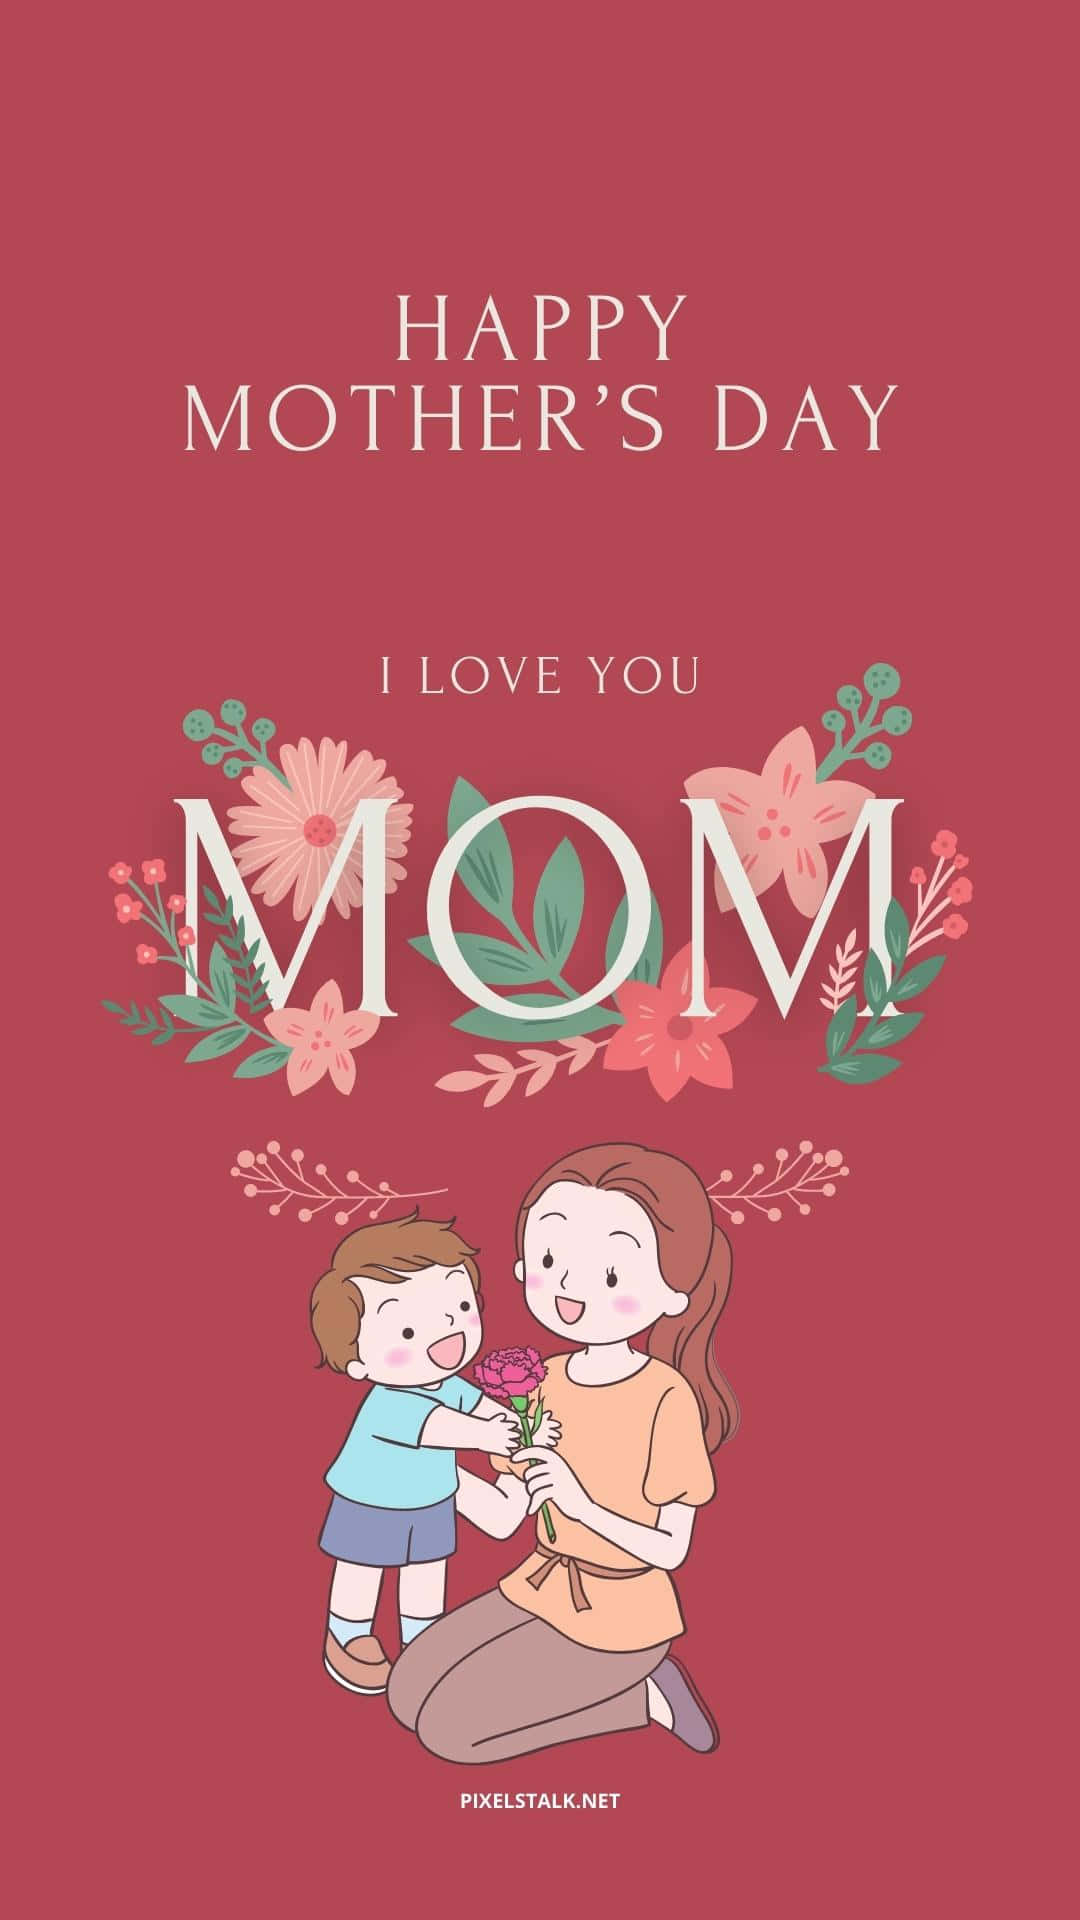 Celebrate your moms this year with a beautiful Happy Mothers Day HD wallpaper! Wallpaper